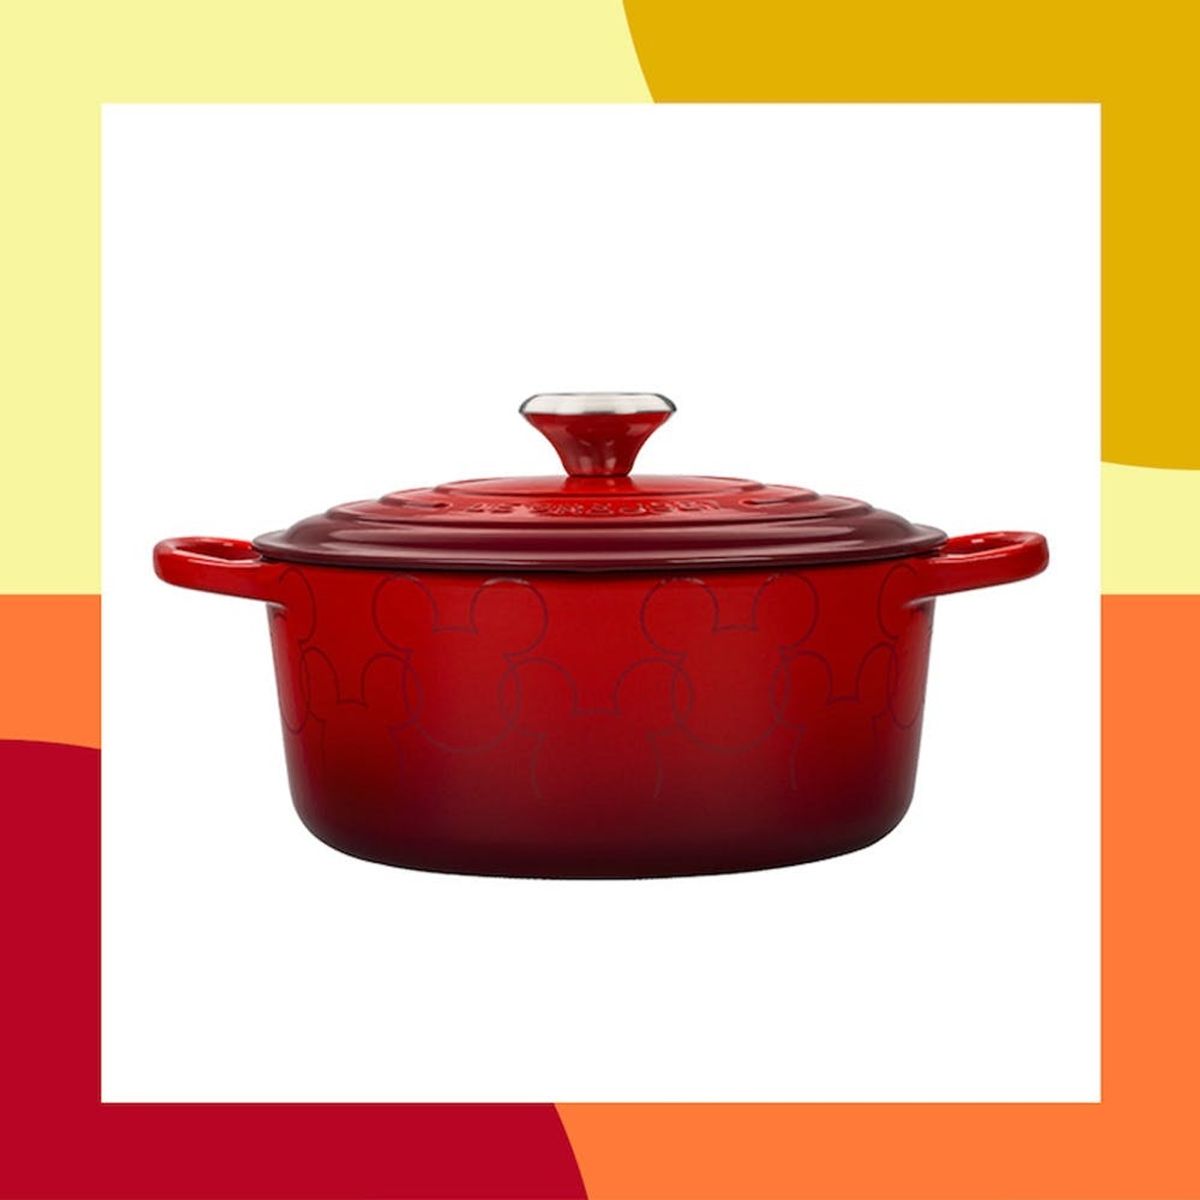 Mickey Mouse Dutch Ovens Are the Latest Le Creuset Launch We Can’t Get Enough Of